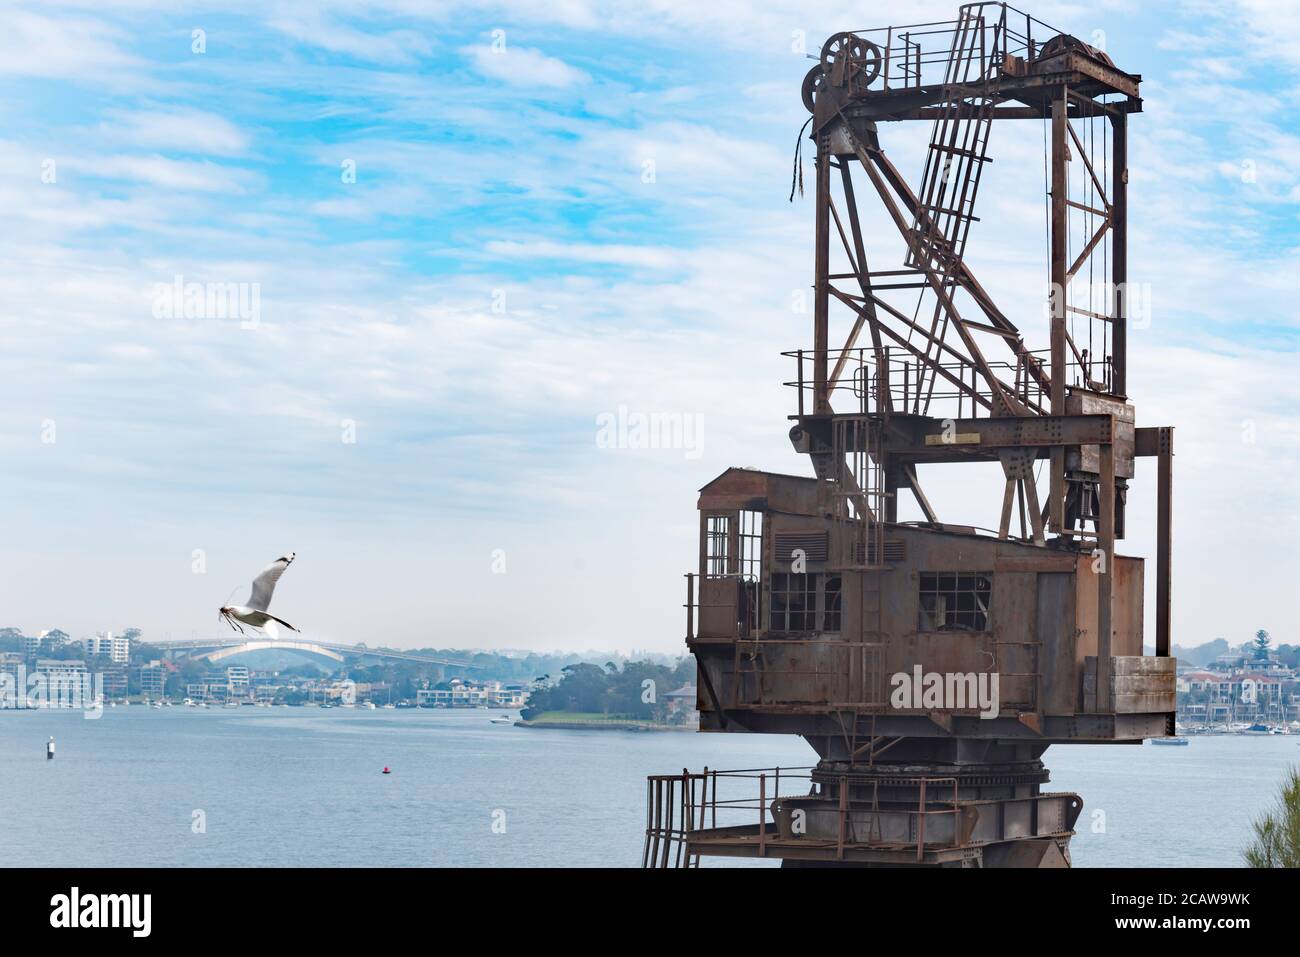 A nesting seagull flies past an large old disused dockyard crane on Cockatoo Island Dockyard in Sydney Harbour, New South Wales, Australia Stock Photo